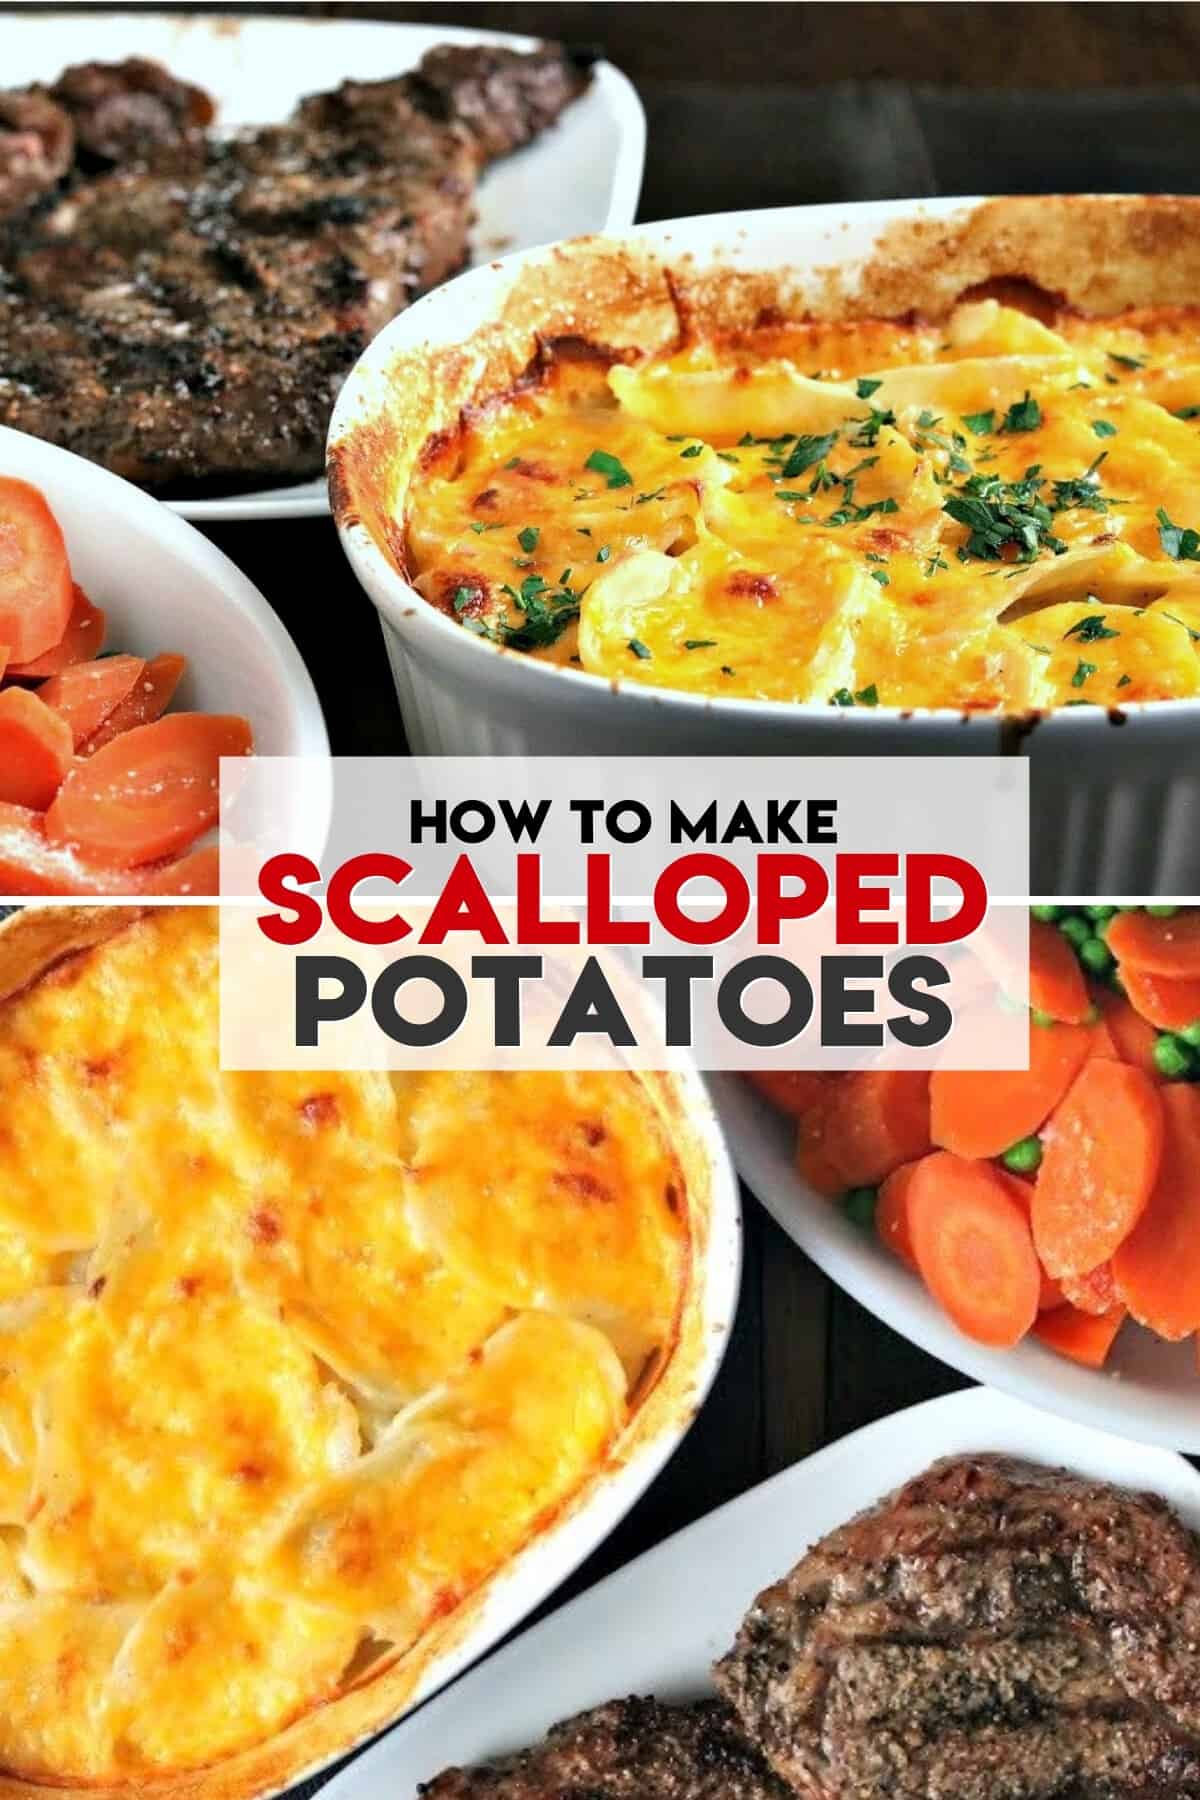 collage of a dinner table with scalloped potatoes and text overlay of the recipe title 